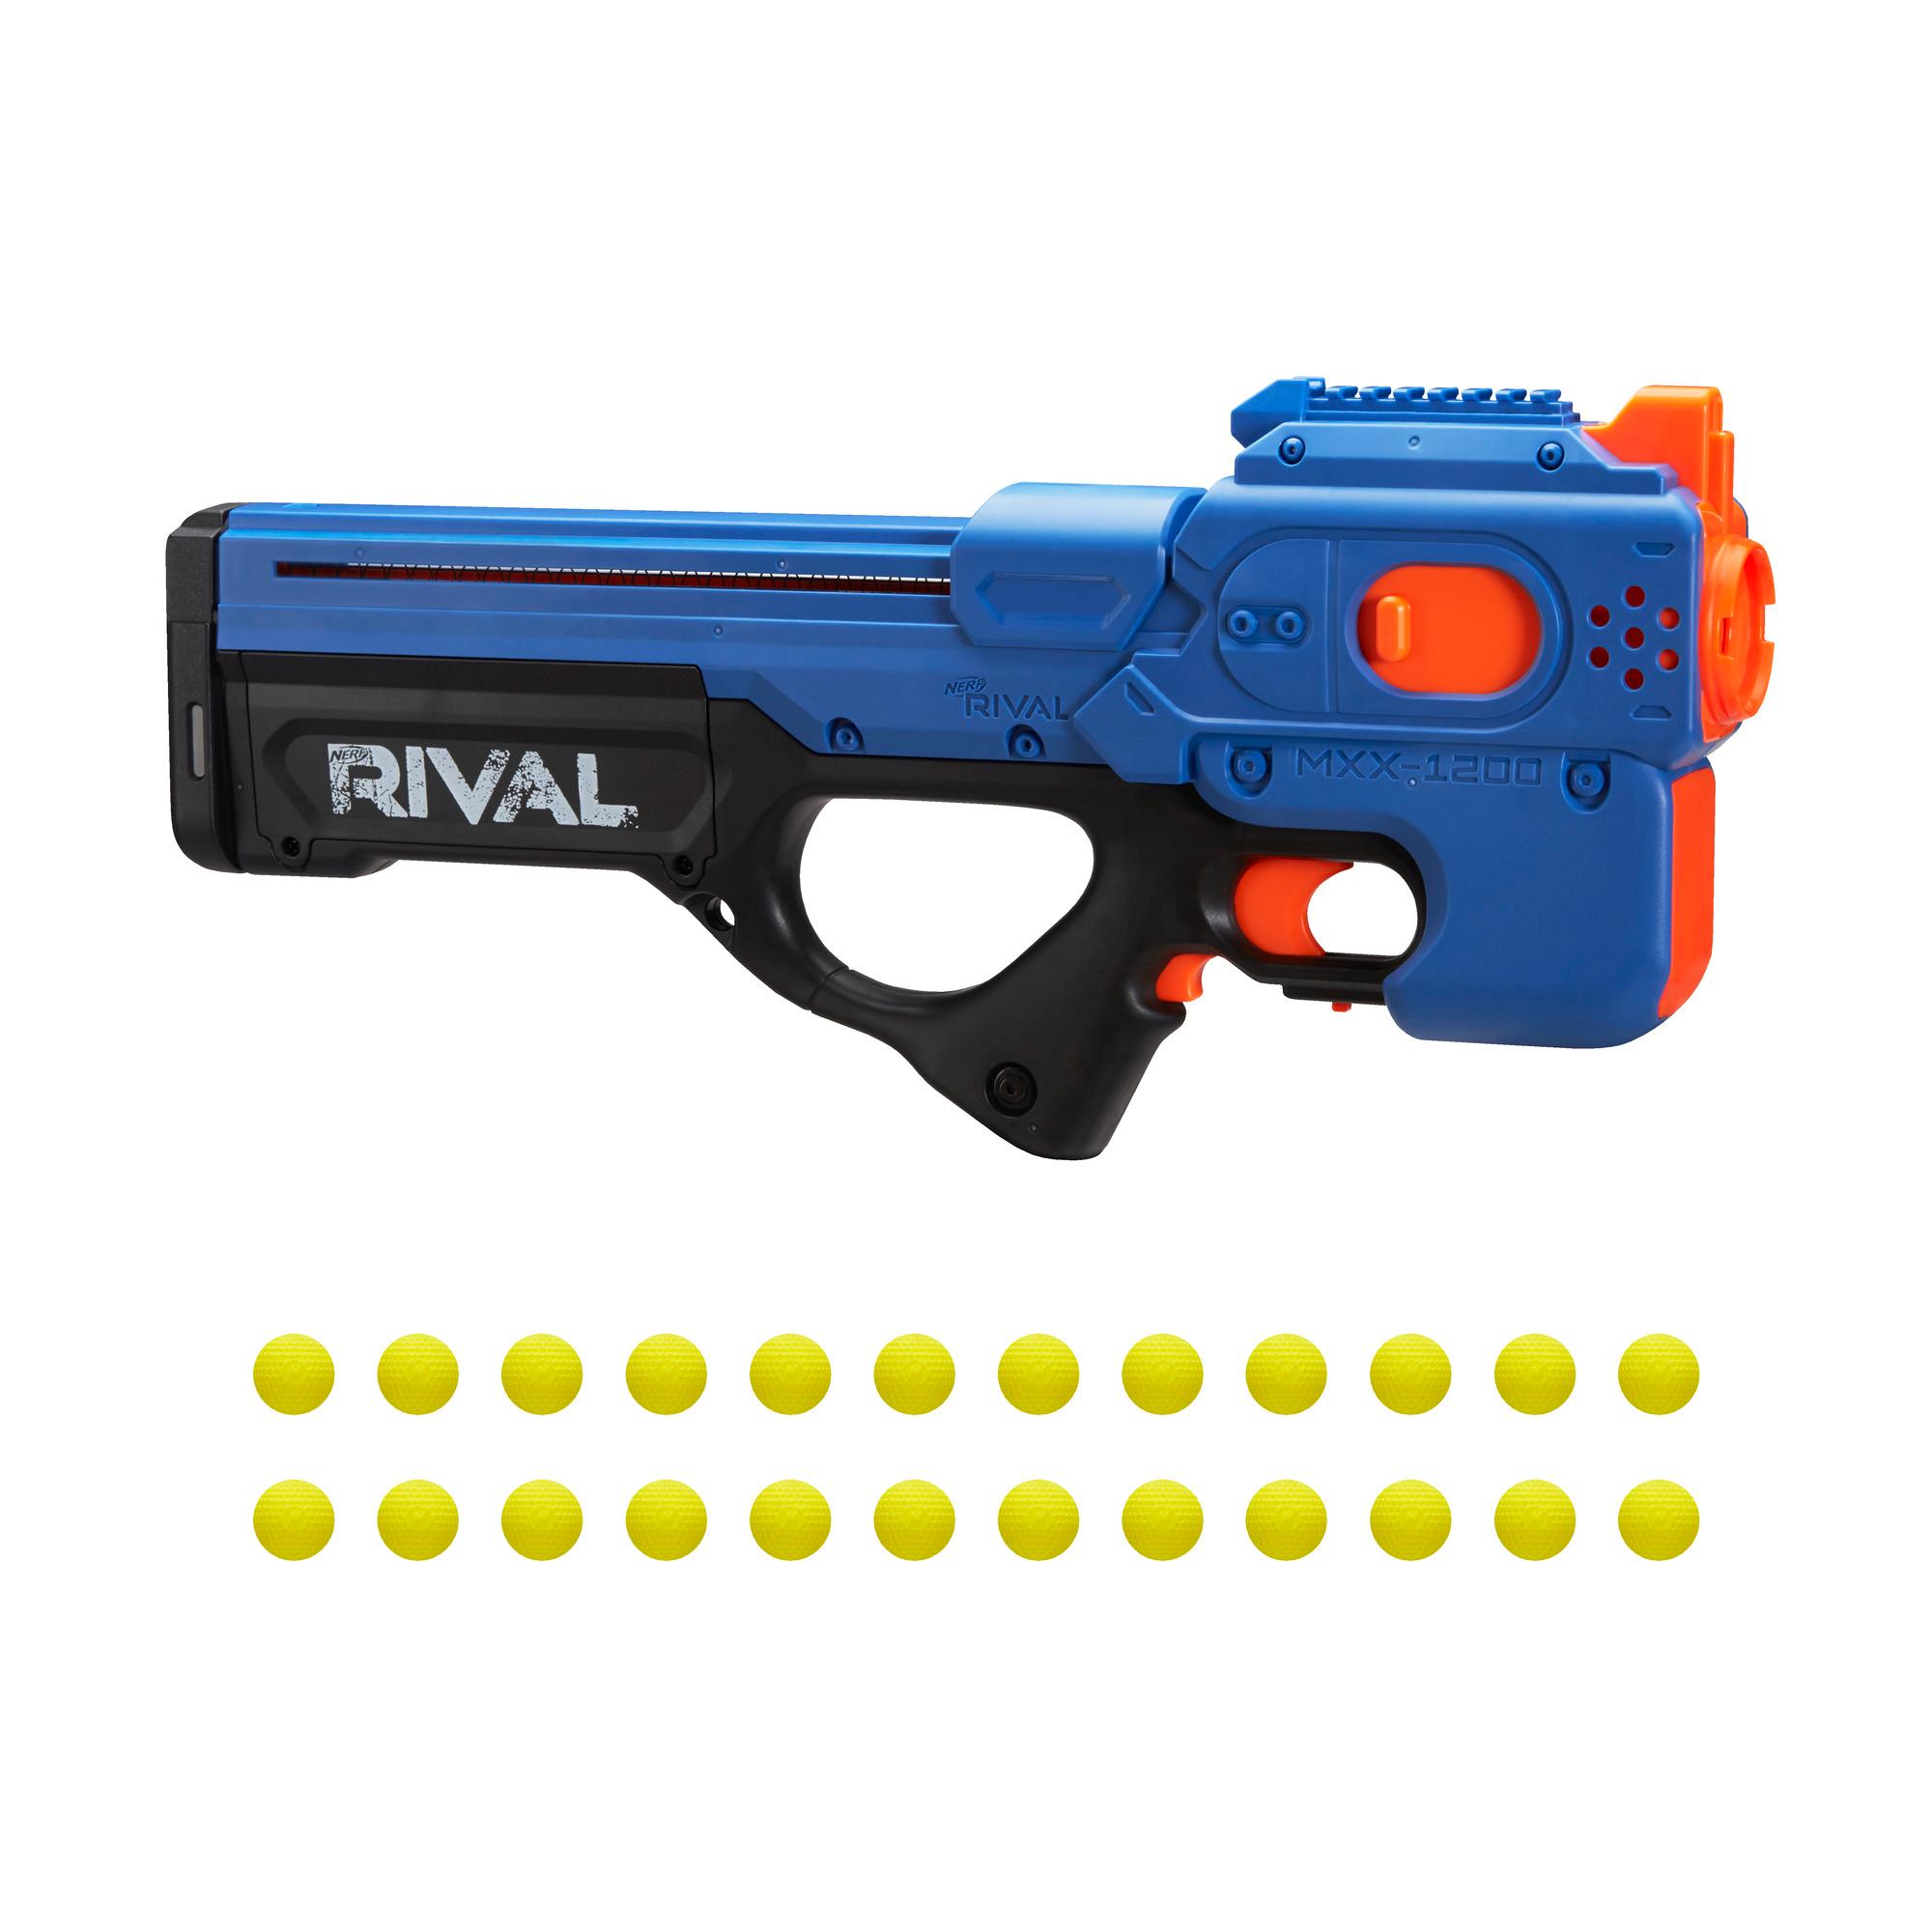 Nerf Rival Charger MXX-1200 Motorized Blaster -- 12-Round Capacity, 95 FPS, 24 Official Nerf Rival Rounds -- Team Blue